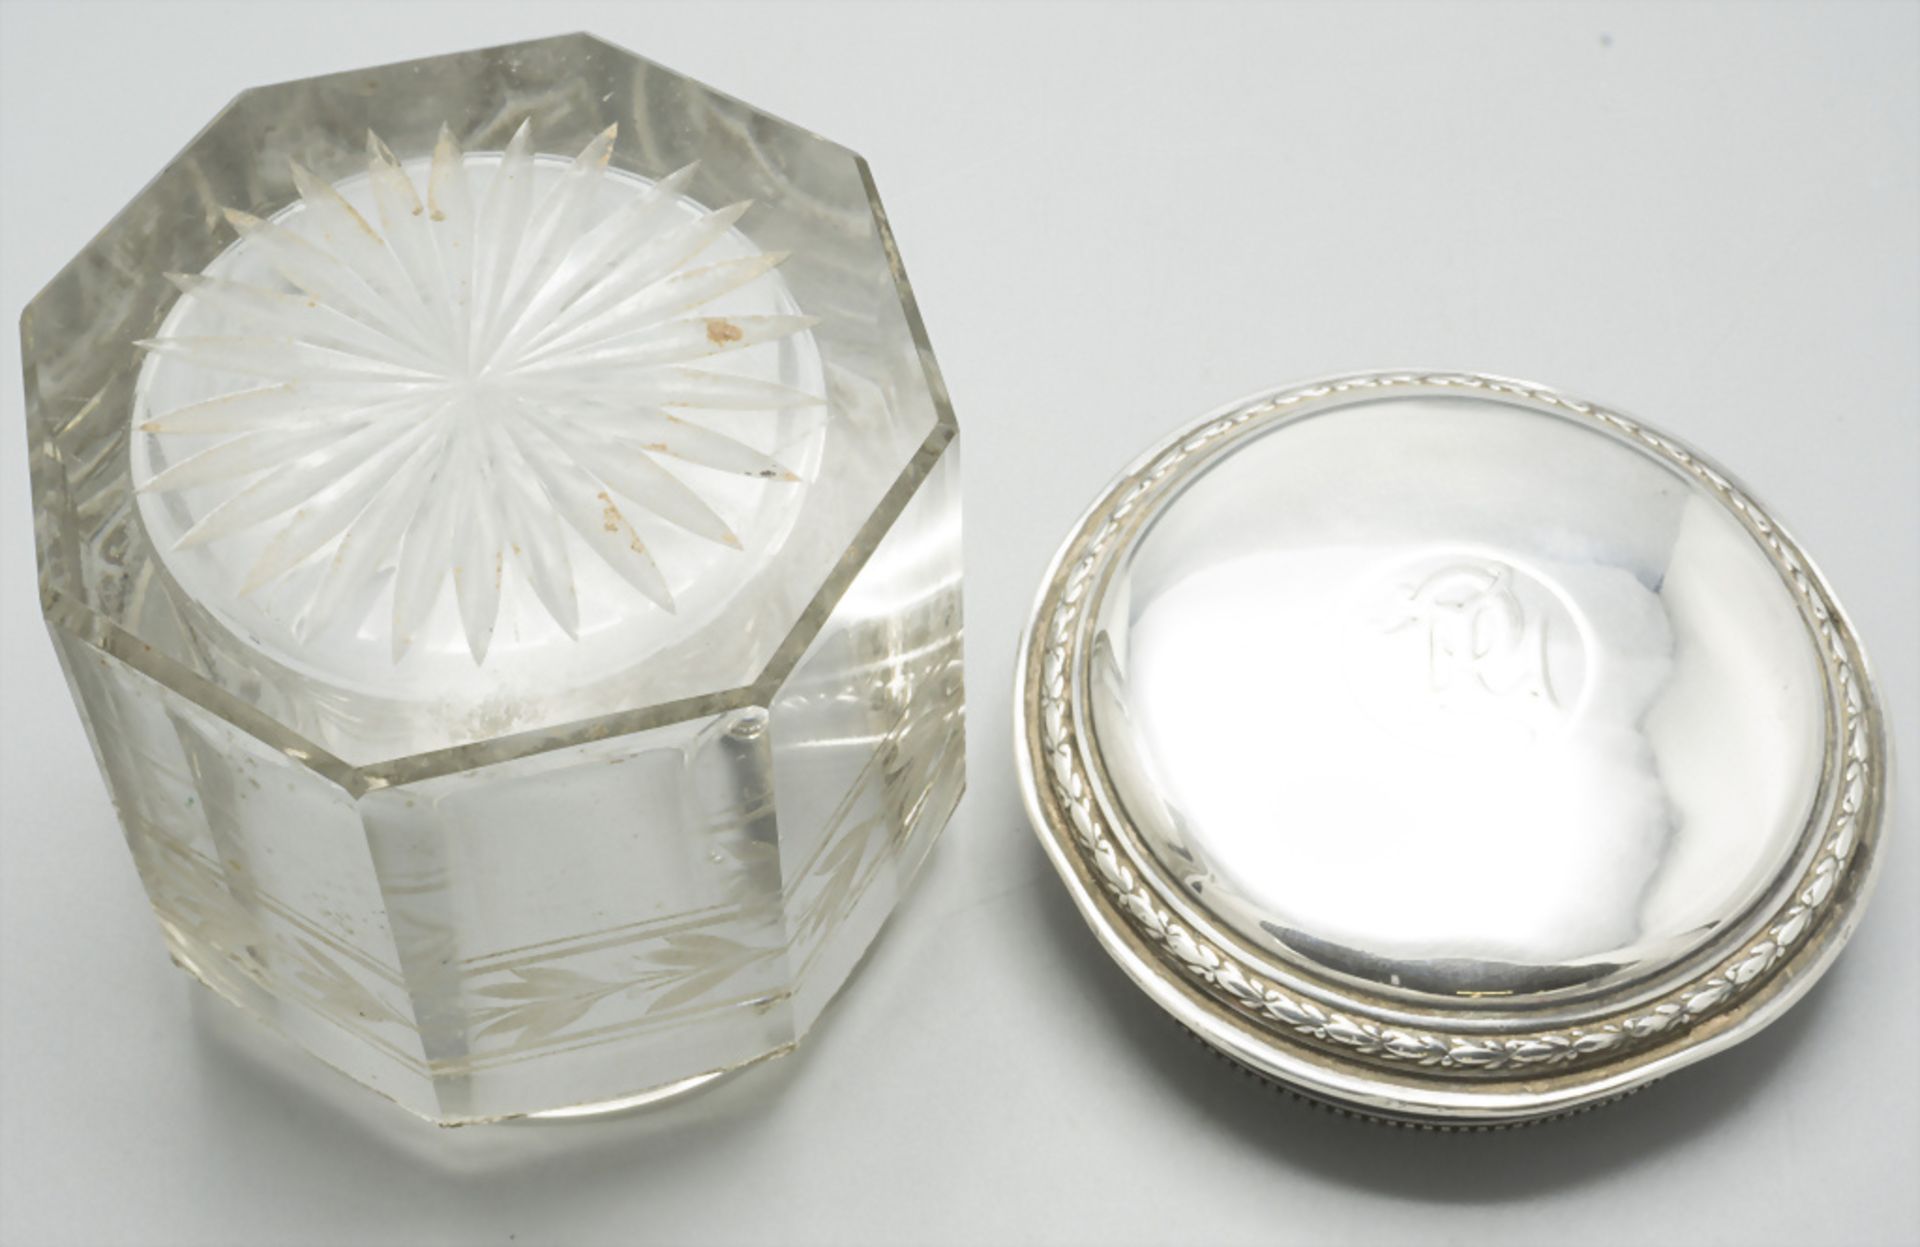 Glasdose mit Silberdeckel / A glass box with silver cover, Paris, um 1880 - Image 4 of 5